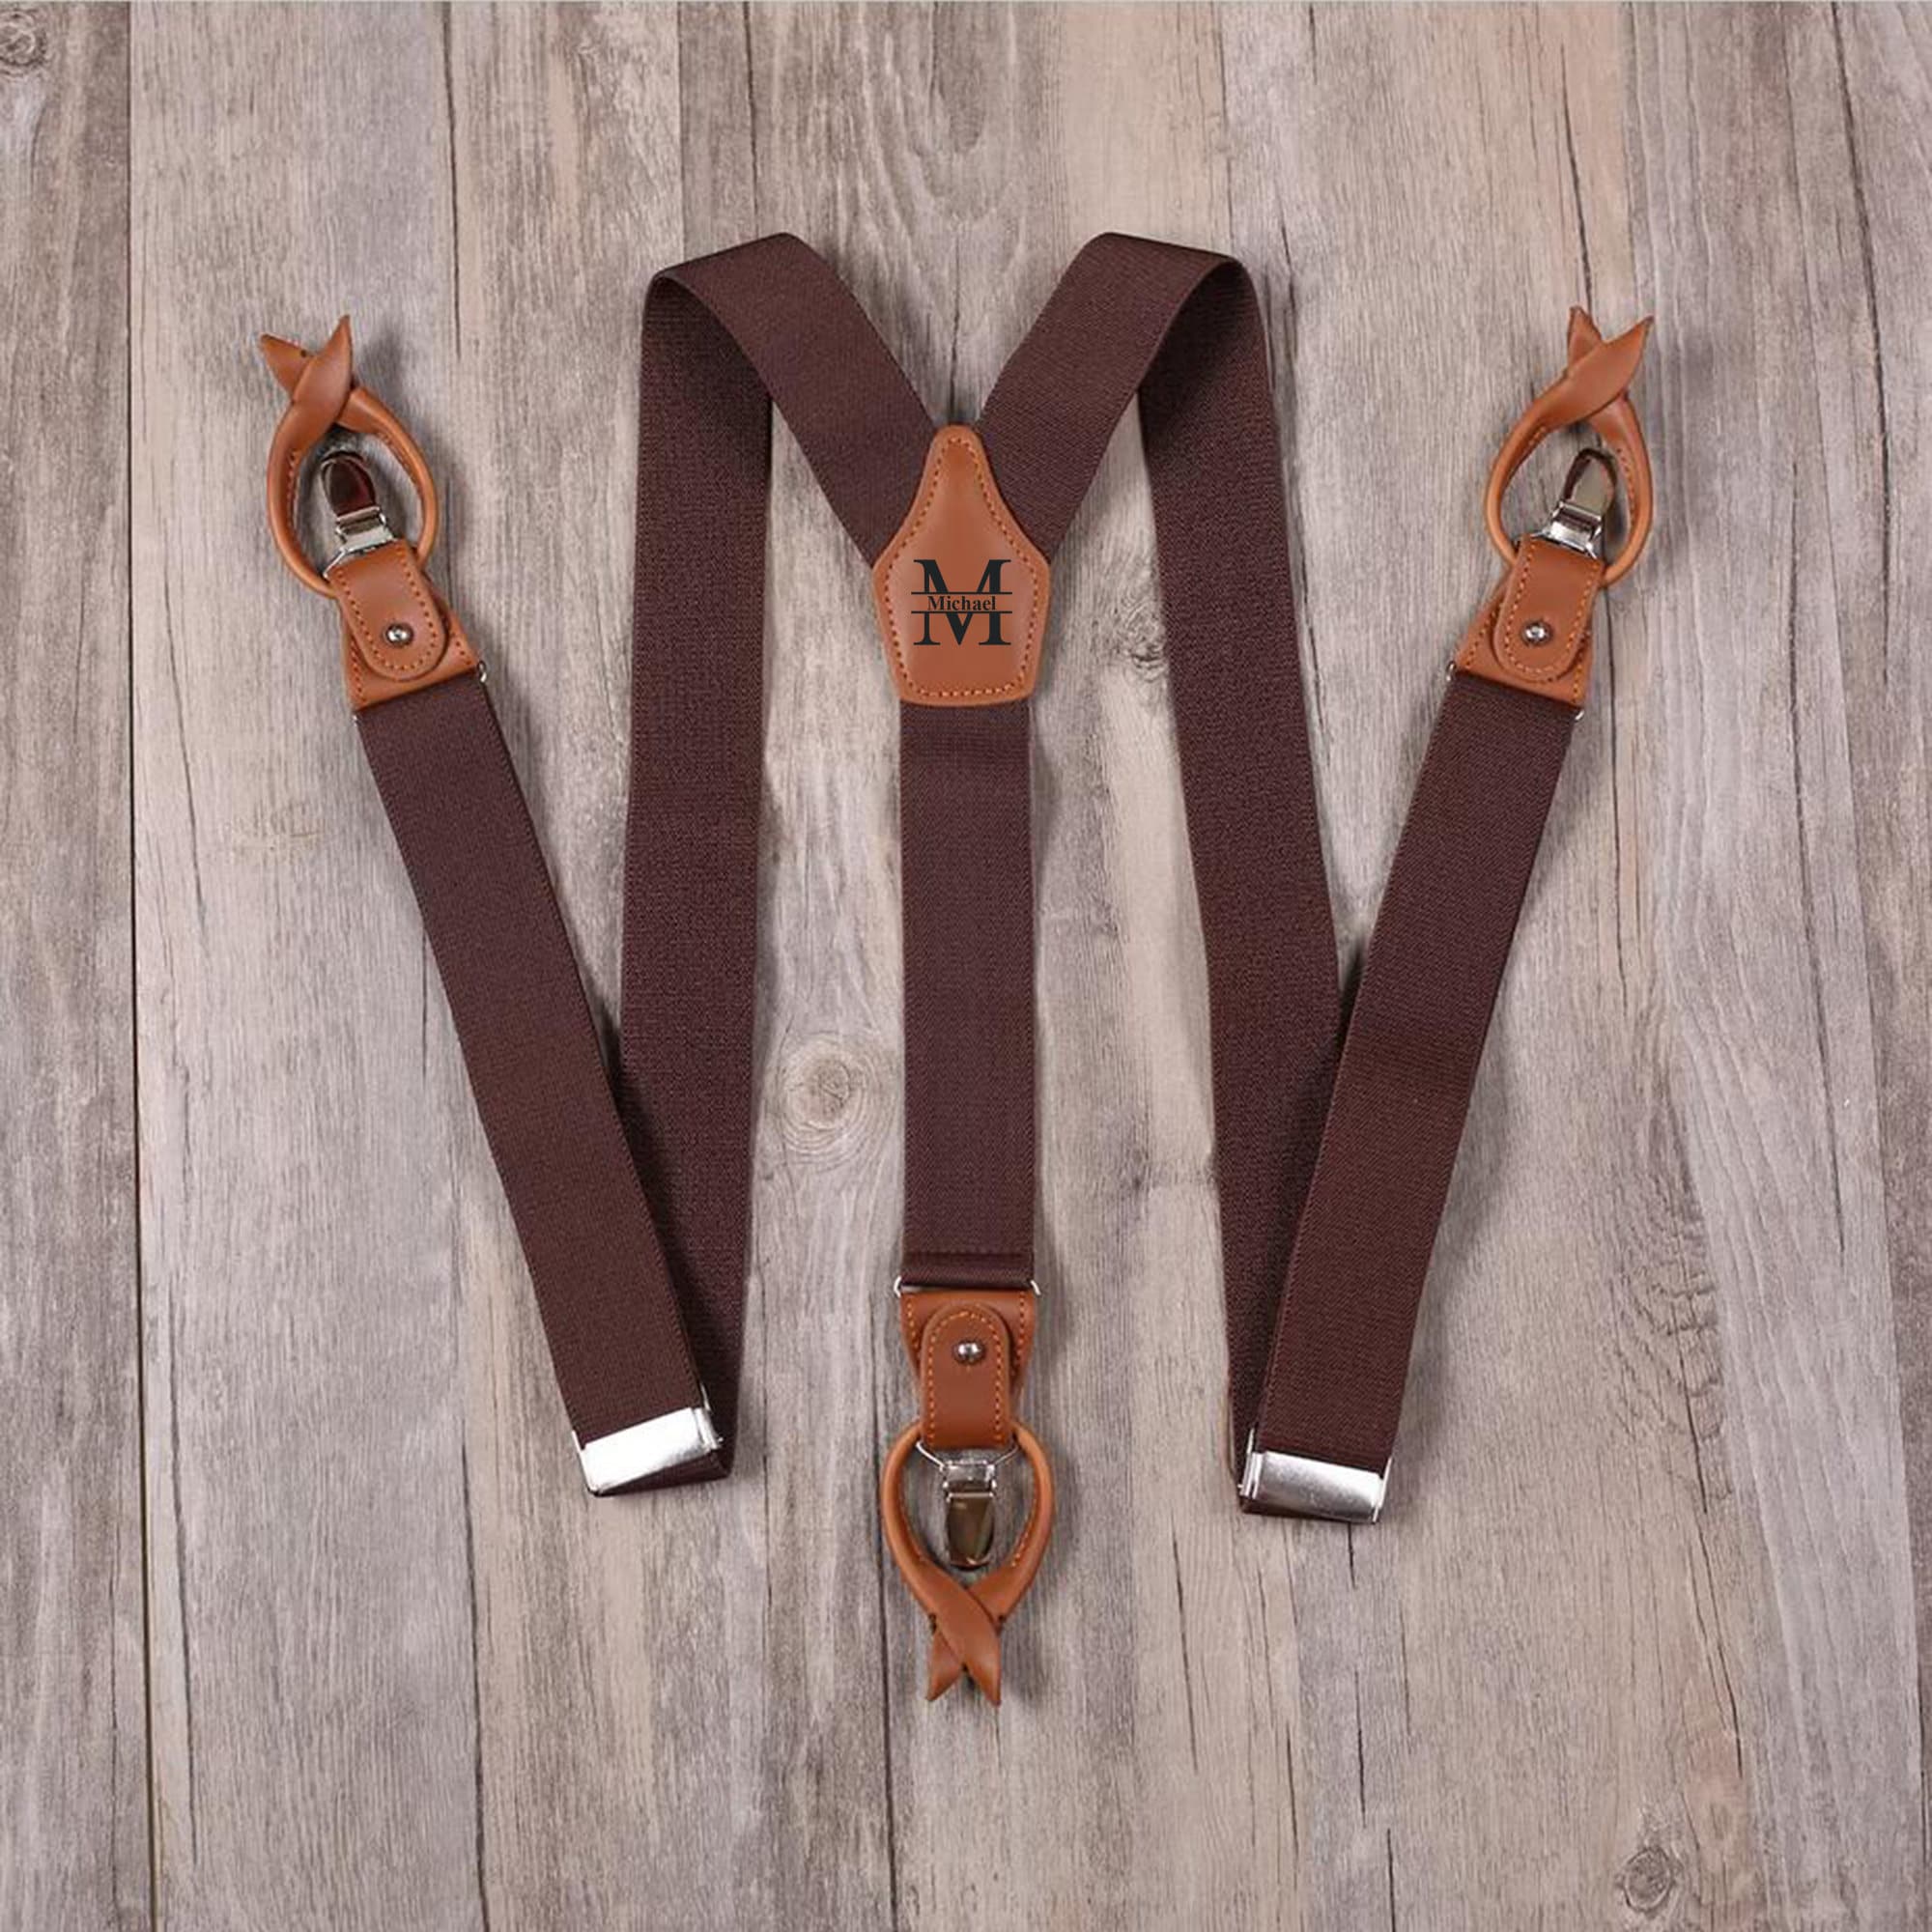 Hold'Em - Y-Back Button Suspenders for Men, Leather-Trimmed Men's  Suspenders, Adjustable Suspenders with Crosspatch and Button Tabs,  Essential Fashion Accessories for Men, Black Suspenders, 46 inches at   Men's Clothing store: Apparel